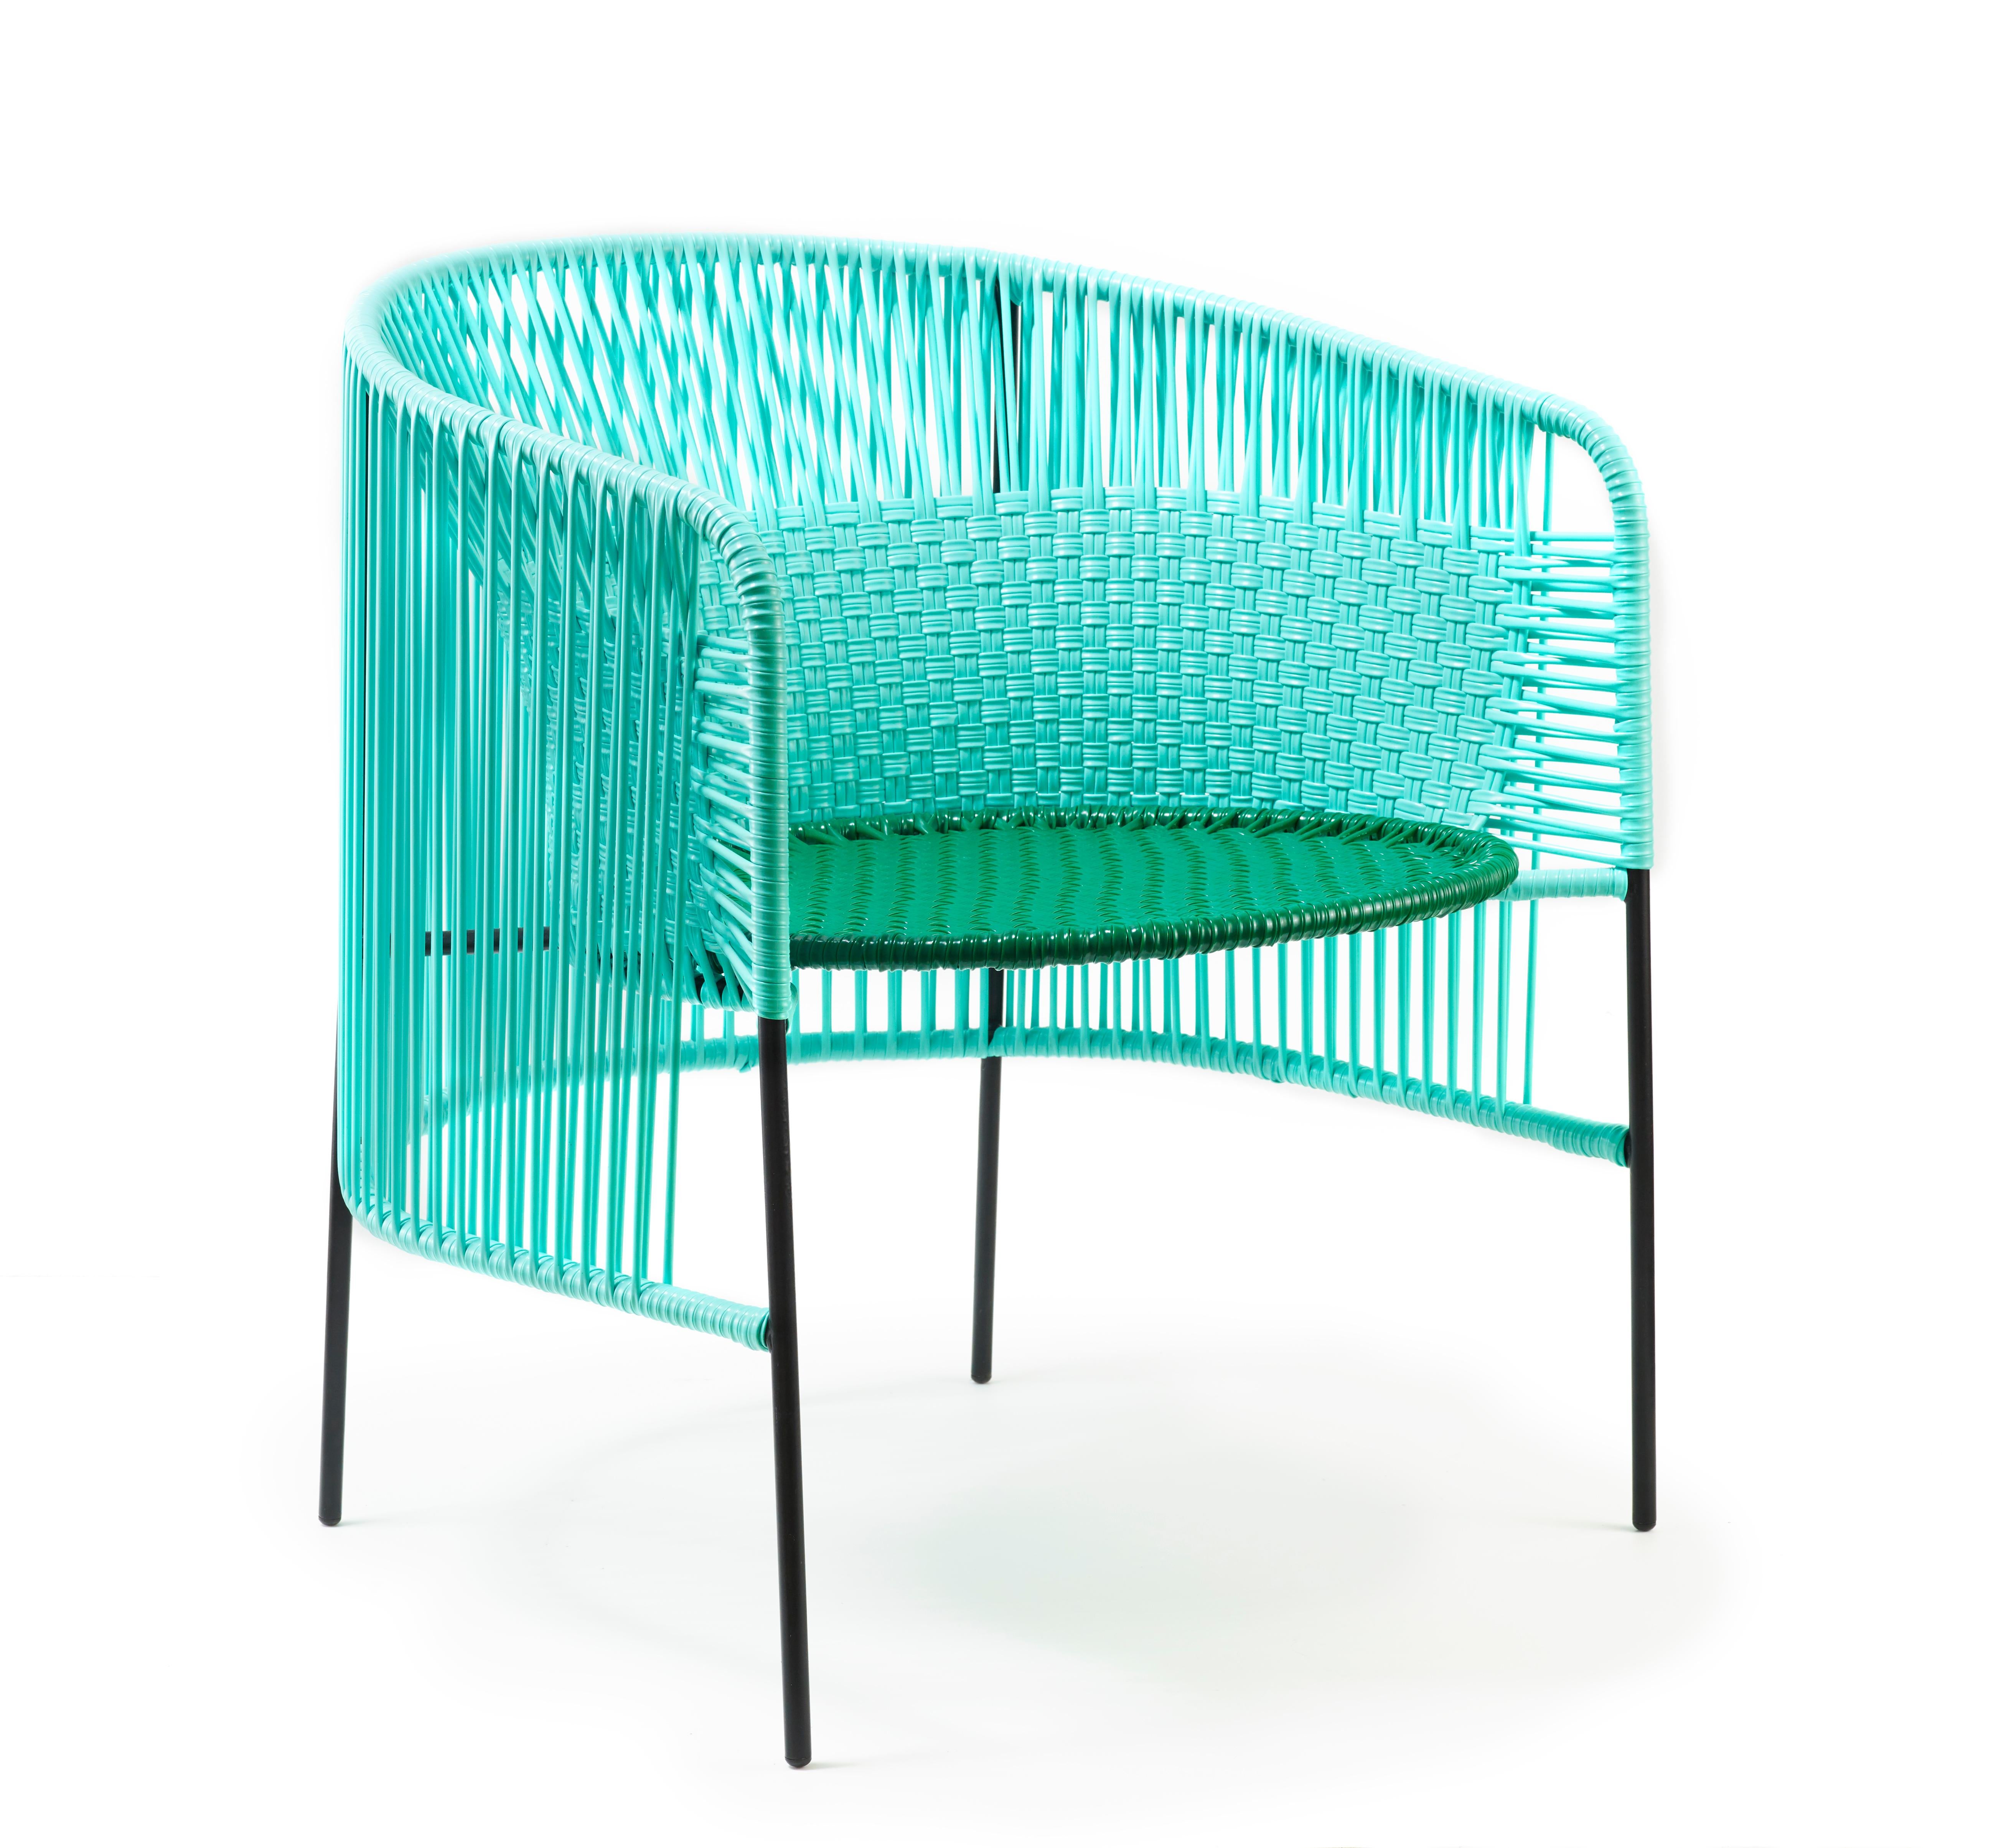 Set of 2 mint caribe lounge chair by Sebastian Herkner.
Materials: Galvanized and powder-coated tubular steel. PVC strings are made from recycled plastic.
Technique: Made from recycled plastic and weaved by local craftspeople in Colombia.